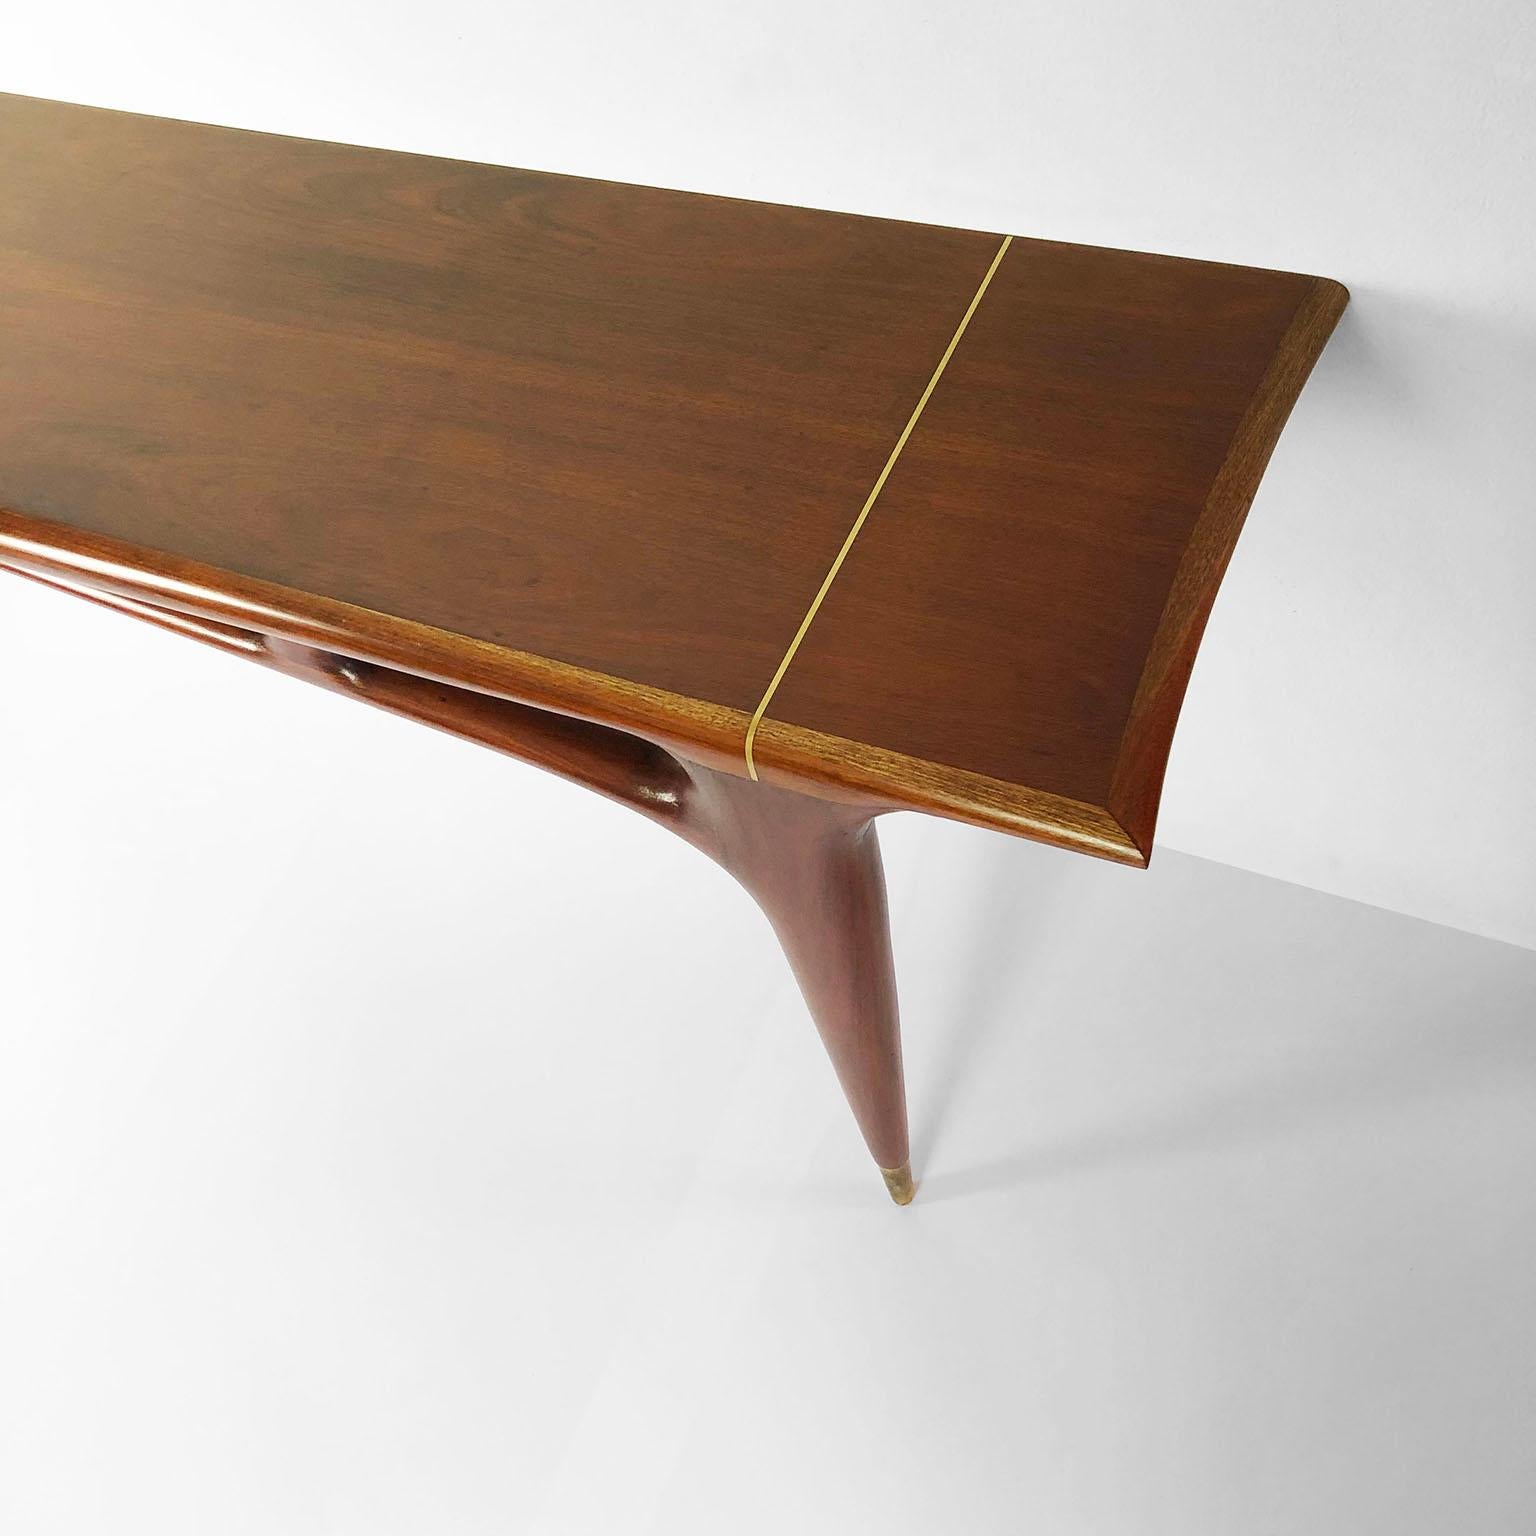 Mid-20th Century Fantastic Midcentury Mexican Modernist Console by Eugenio Escudero For Sale